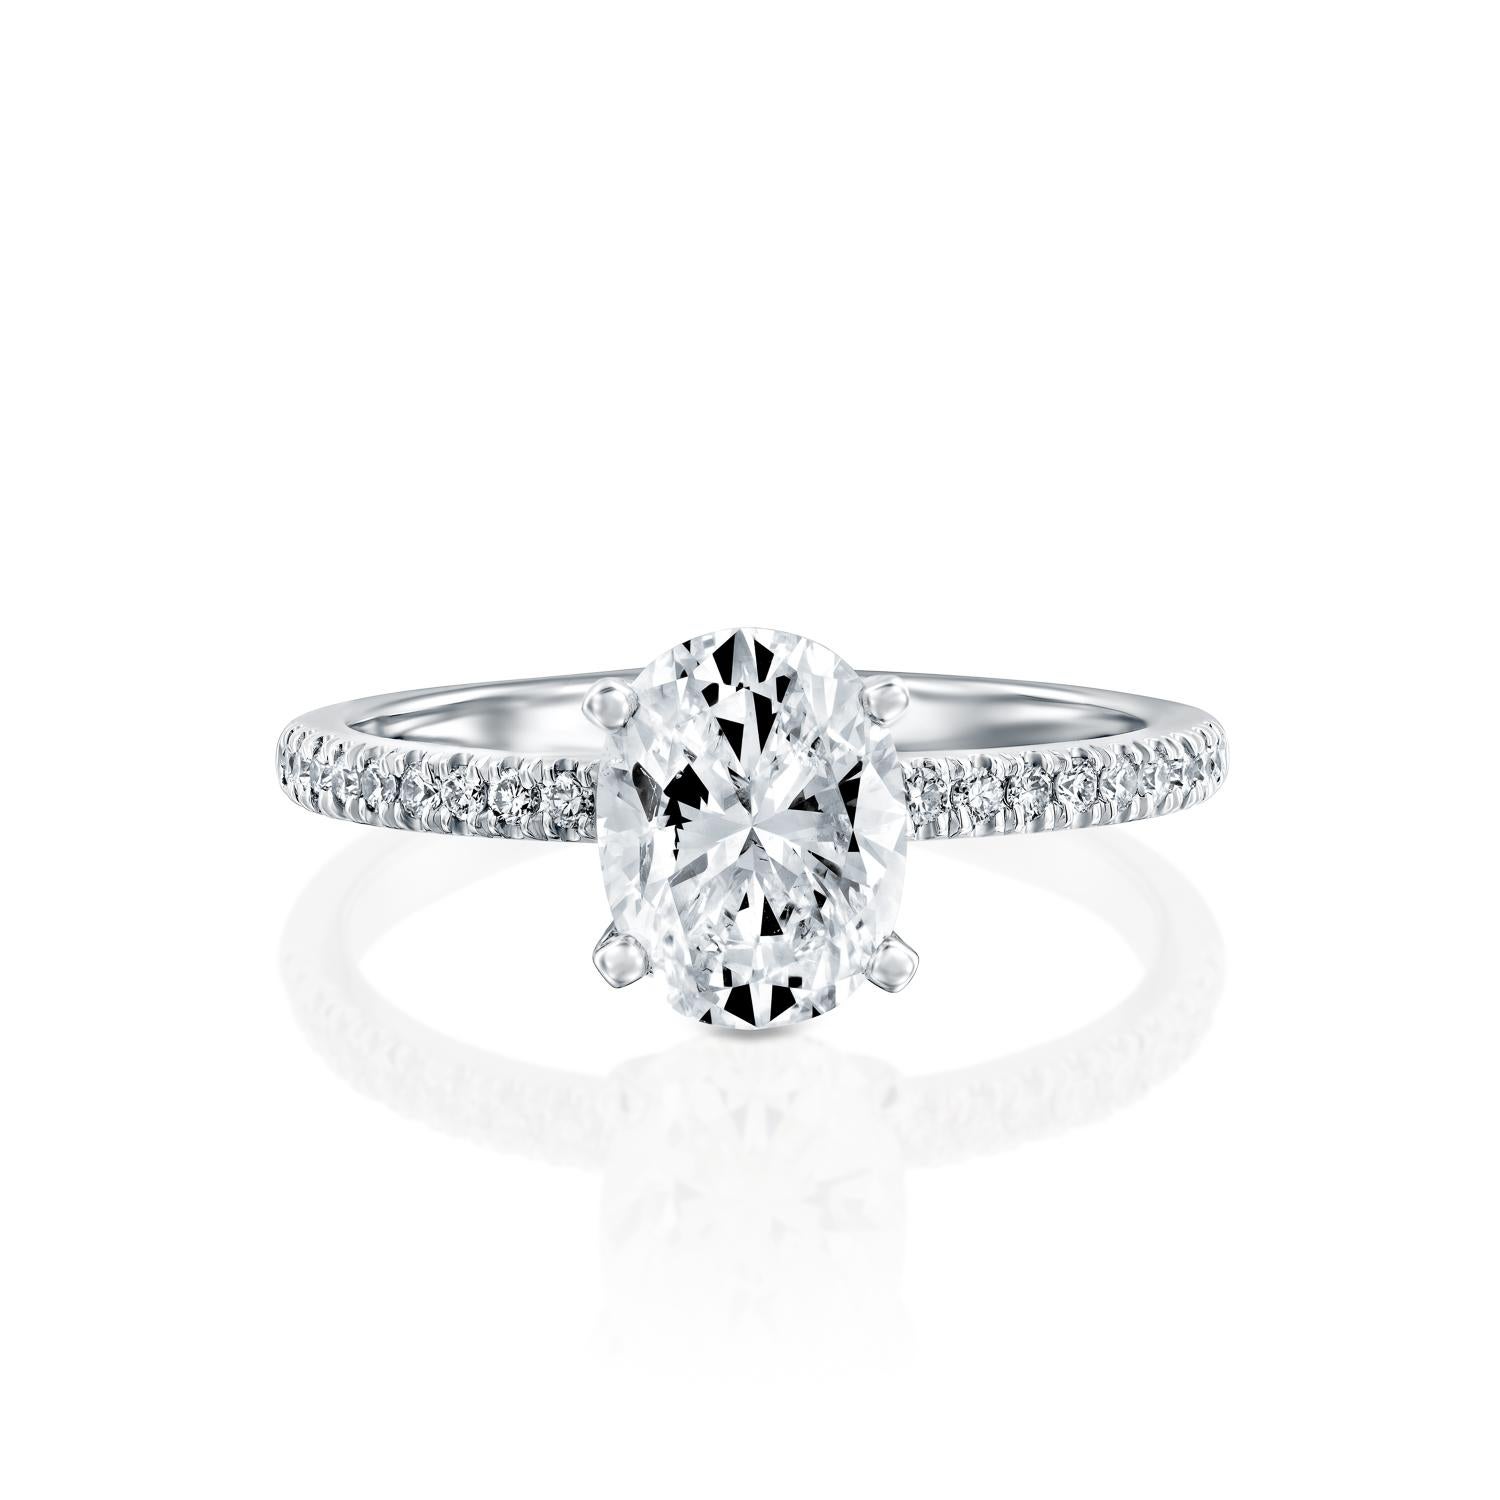 Exquisitely hand crafted ring features a solitaire GIA certified diamond. Ring features a 2 carat oval cut 100% eye clean natural diamond of F-G color and VS2-SI1 clarity and it is accented by diamonds of approx. 0.15 total carat weight. Set in a